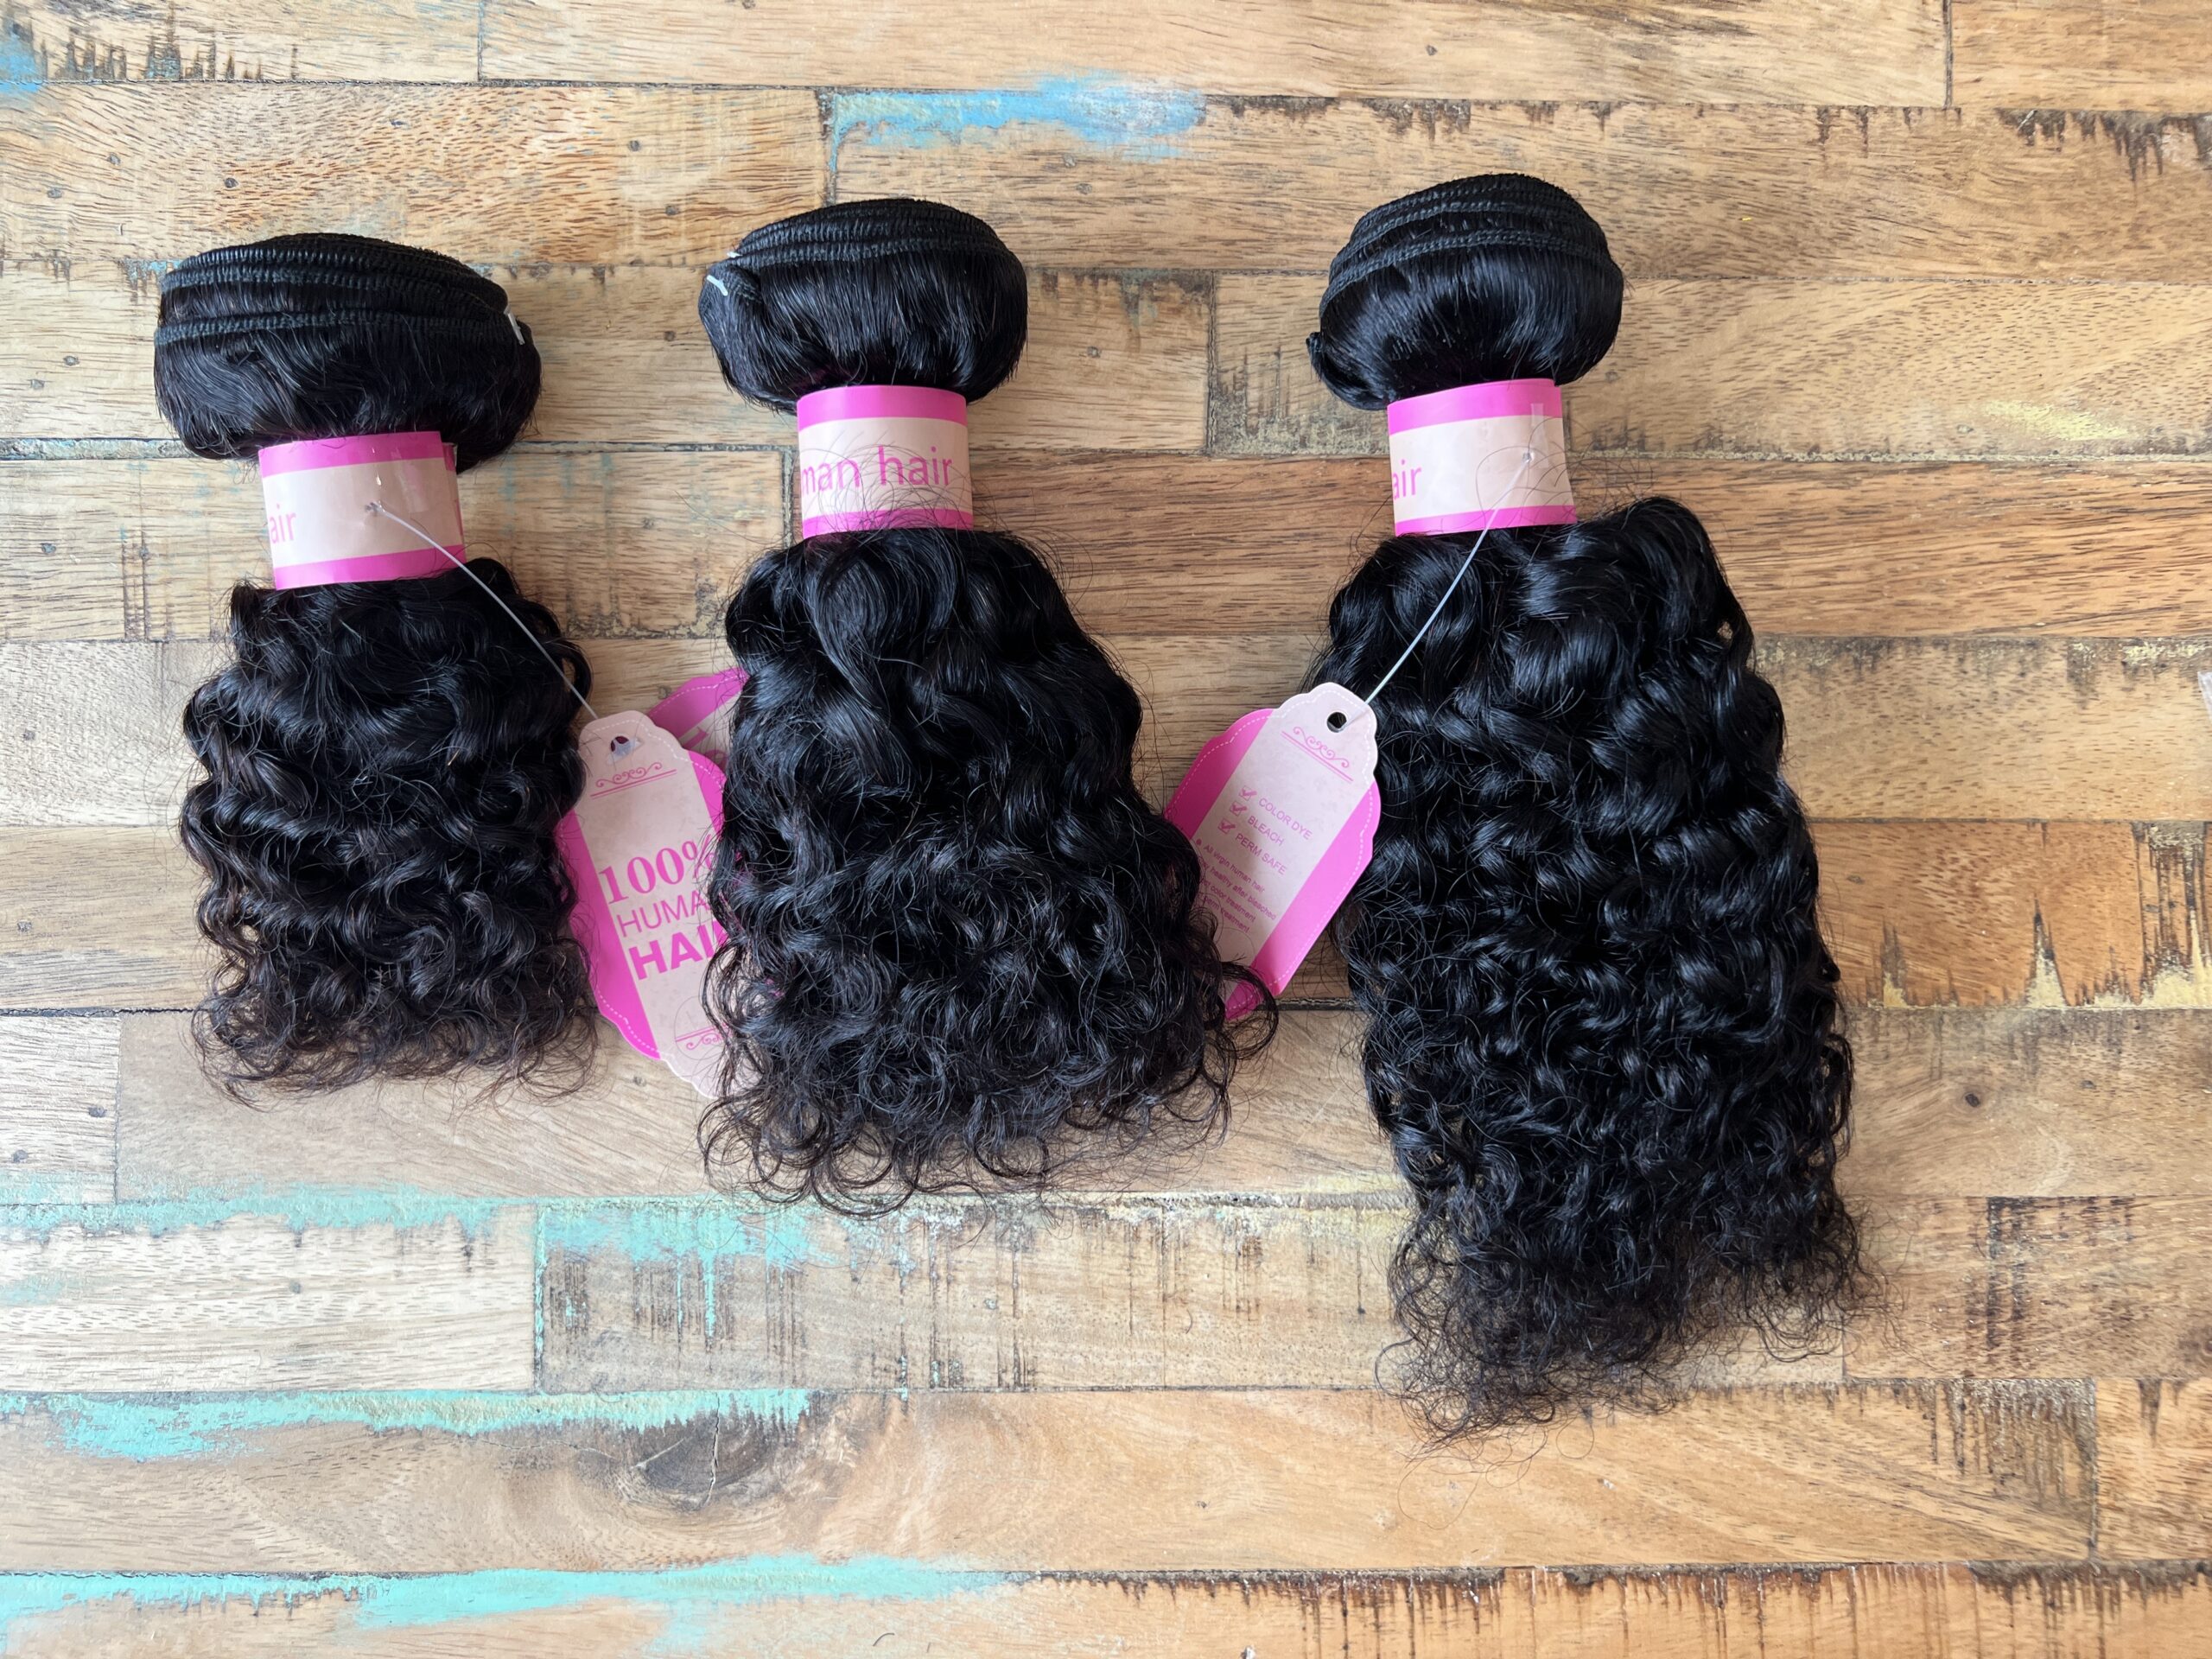 These Brazilian hair strands are 100% human hair with defined curls and are incredibly easy to install. You can also create different hairstyles with these extensions for curly hair.